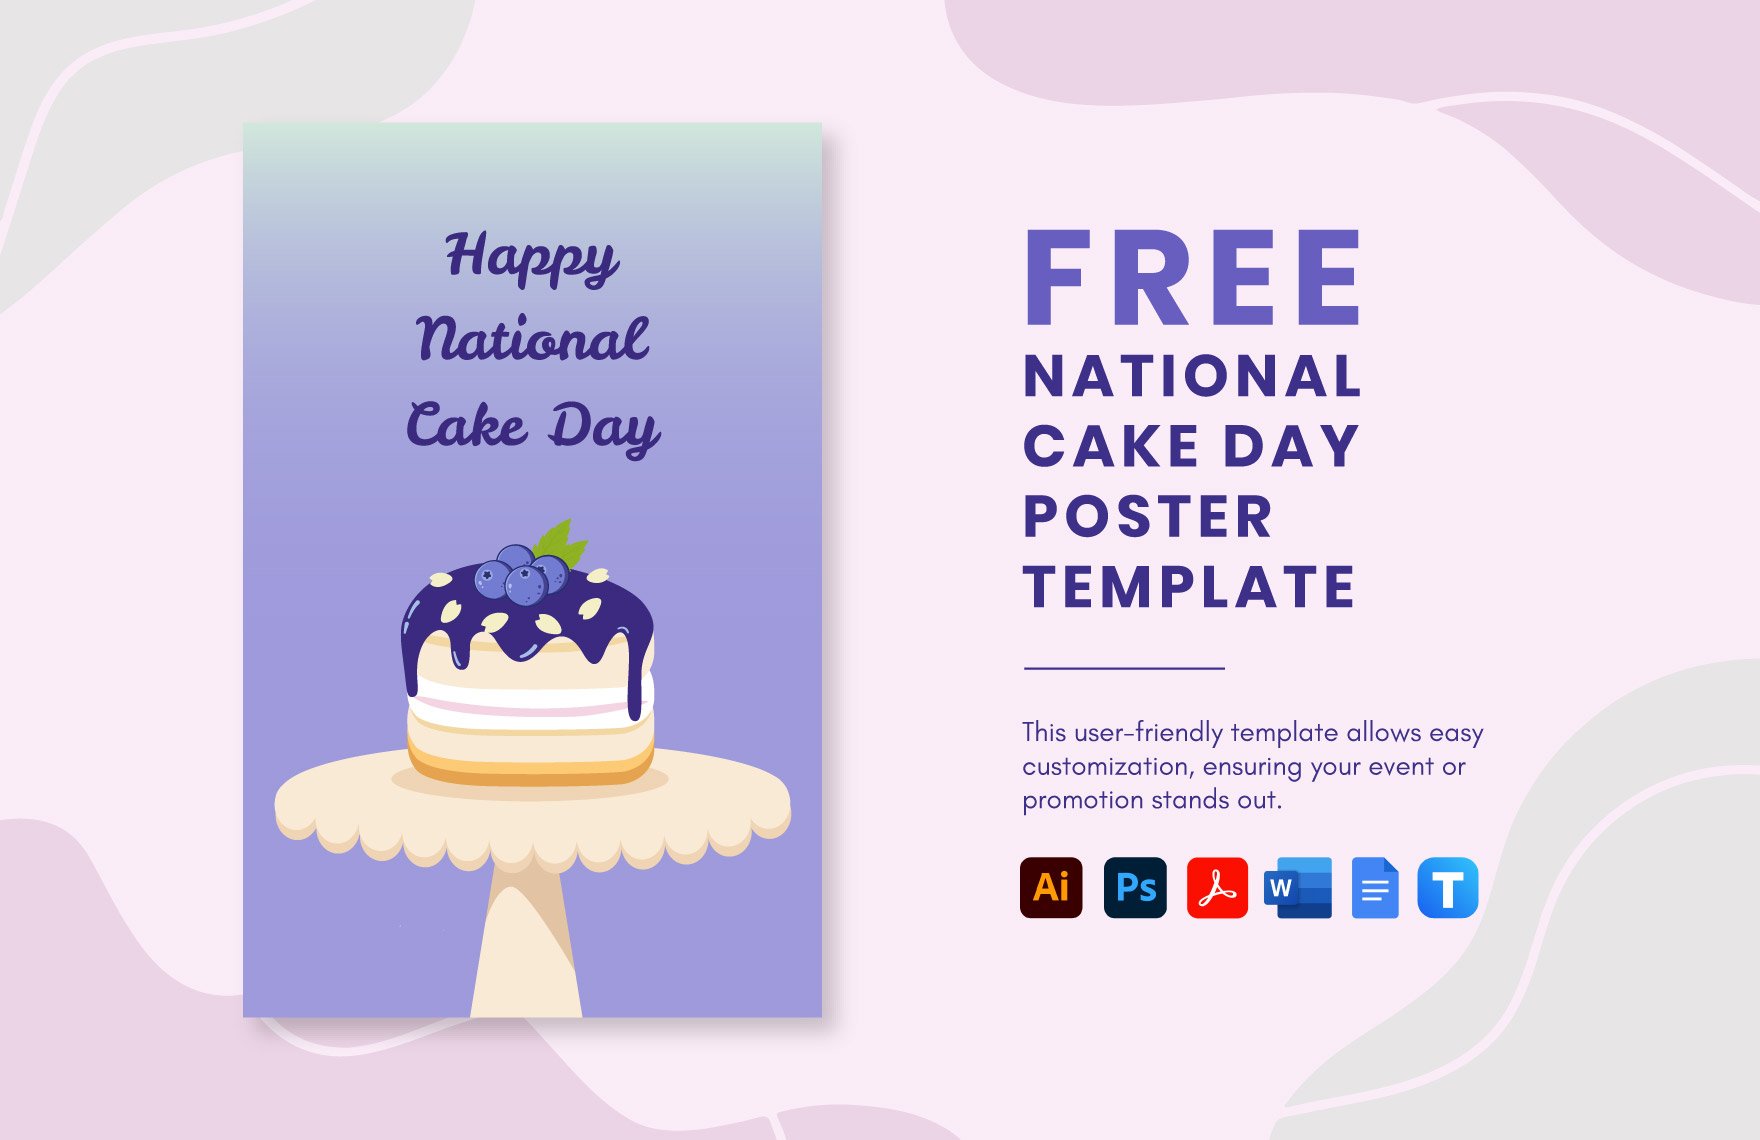 National Cake Day Poster